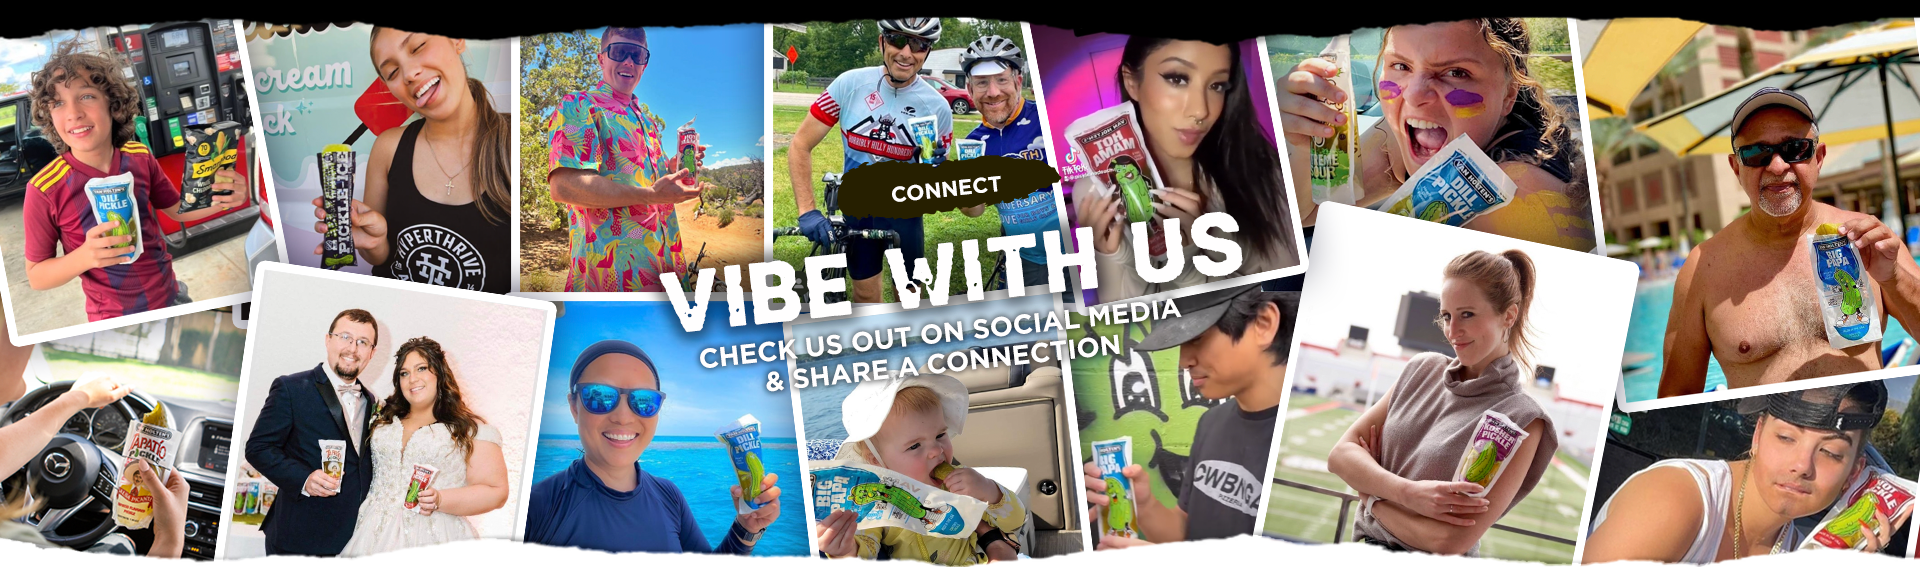 Connect & Vibe With Us. Check us out on social media & Share a Connection